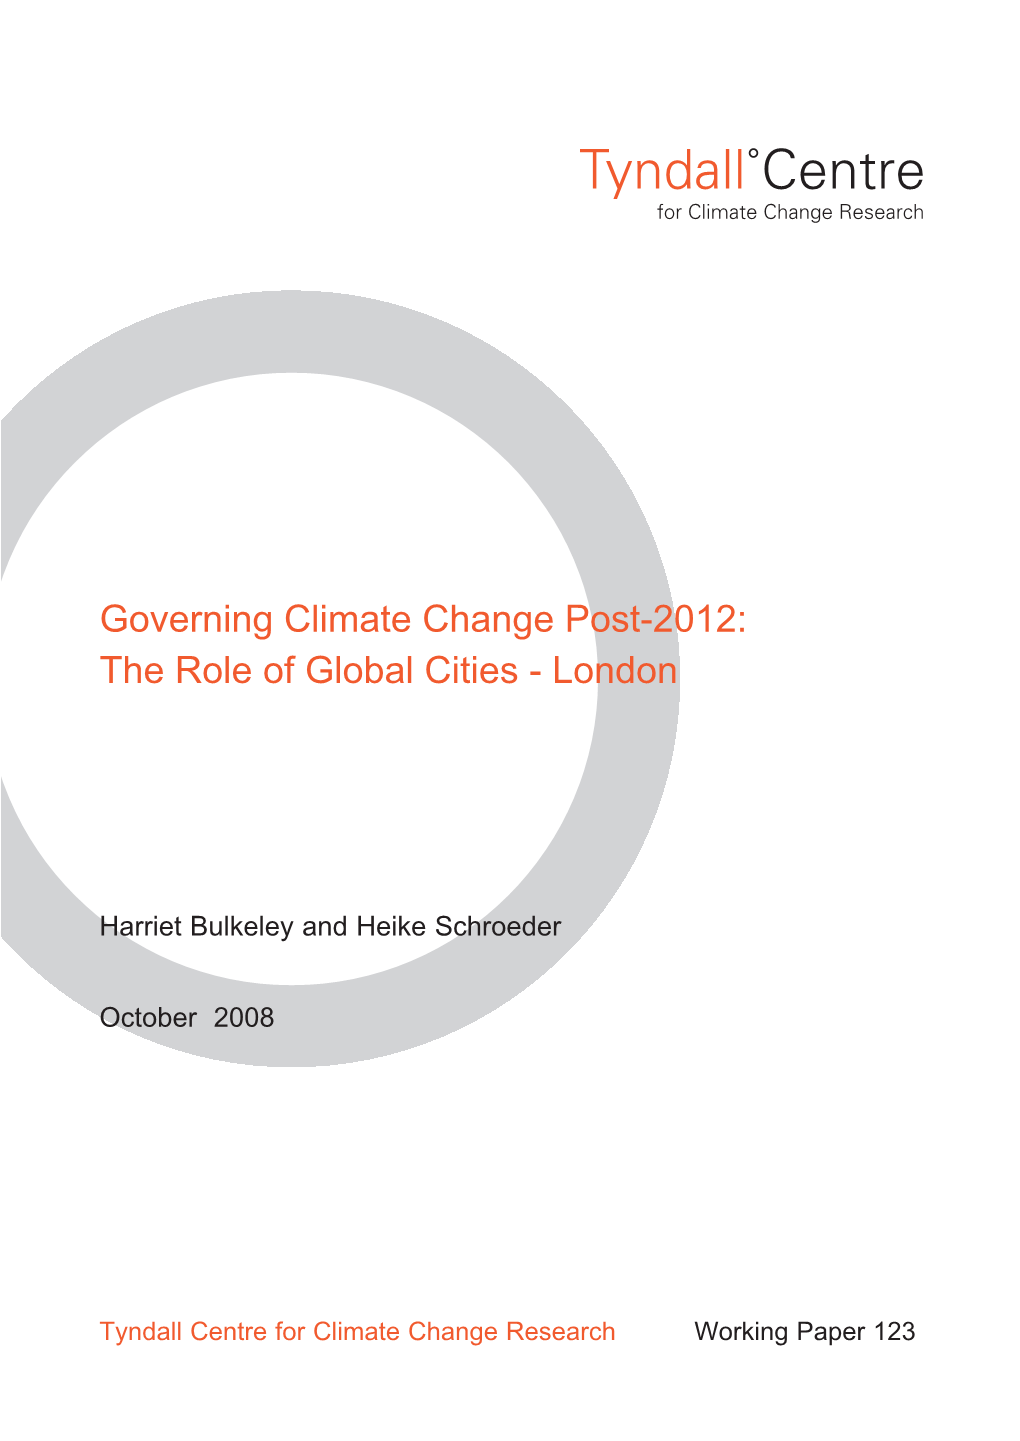 Governing Climate Change Post-2012: the Role of Global Cities - London